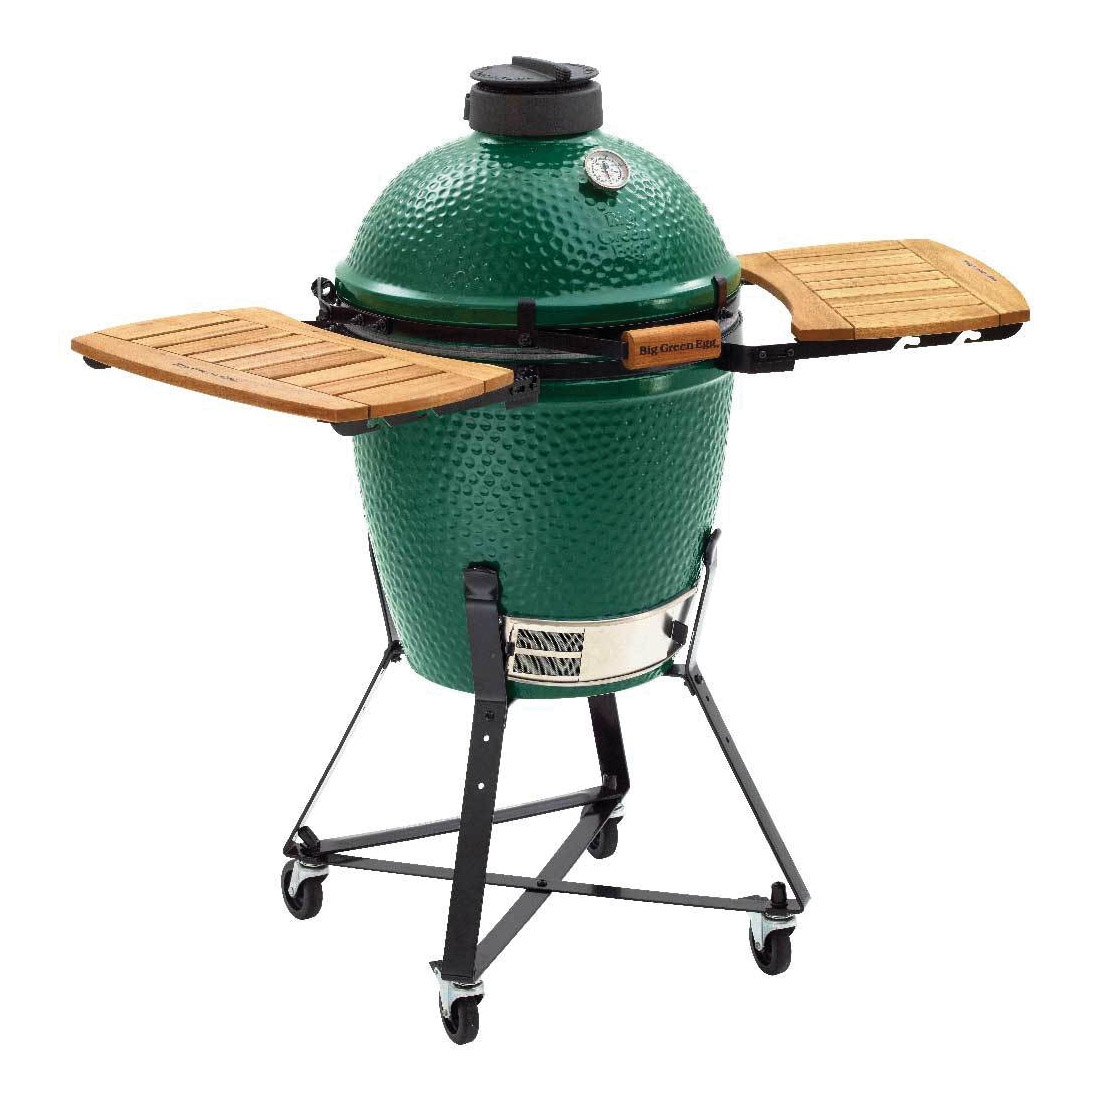 Big Green Egg 126528 Grill Cover, Fabric - 2